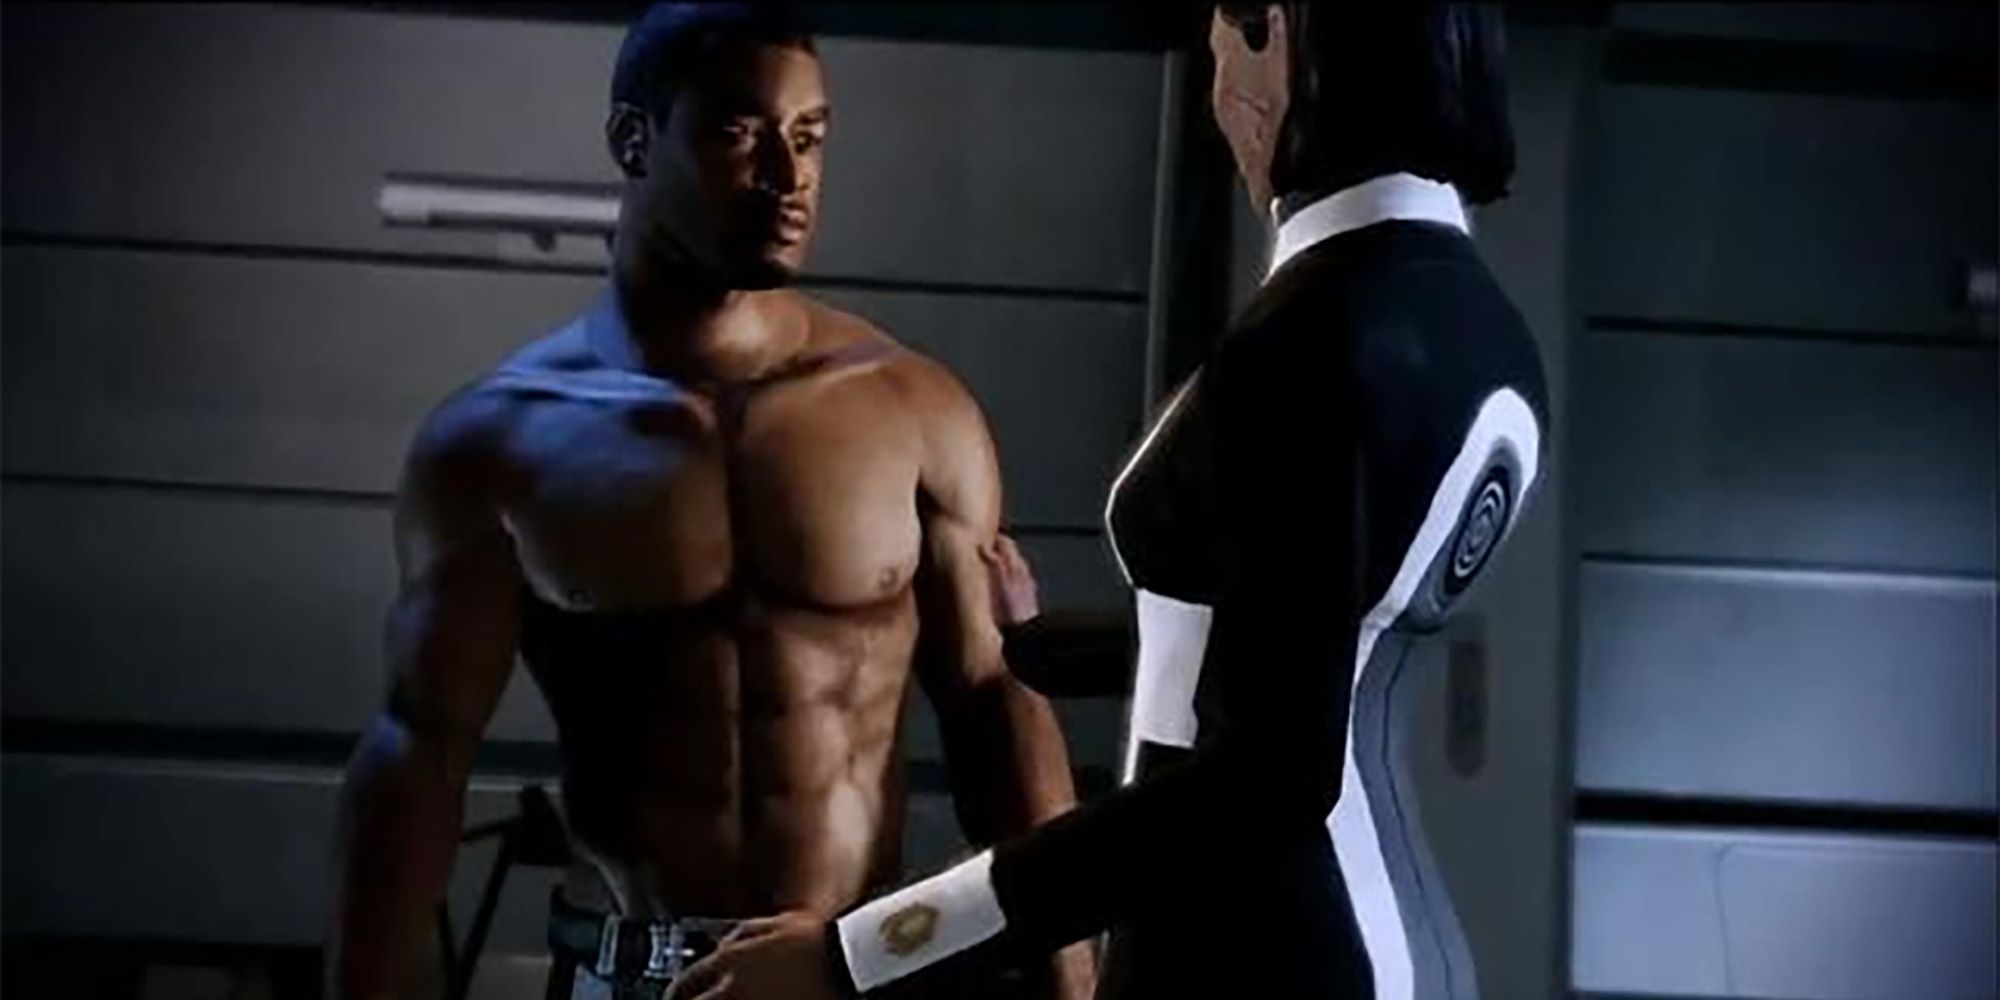 jacob taylor with shepard mass effect